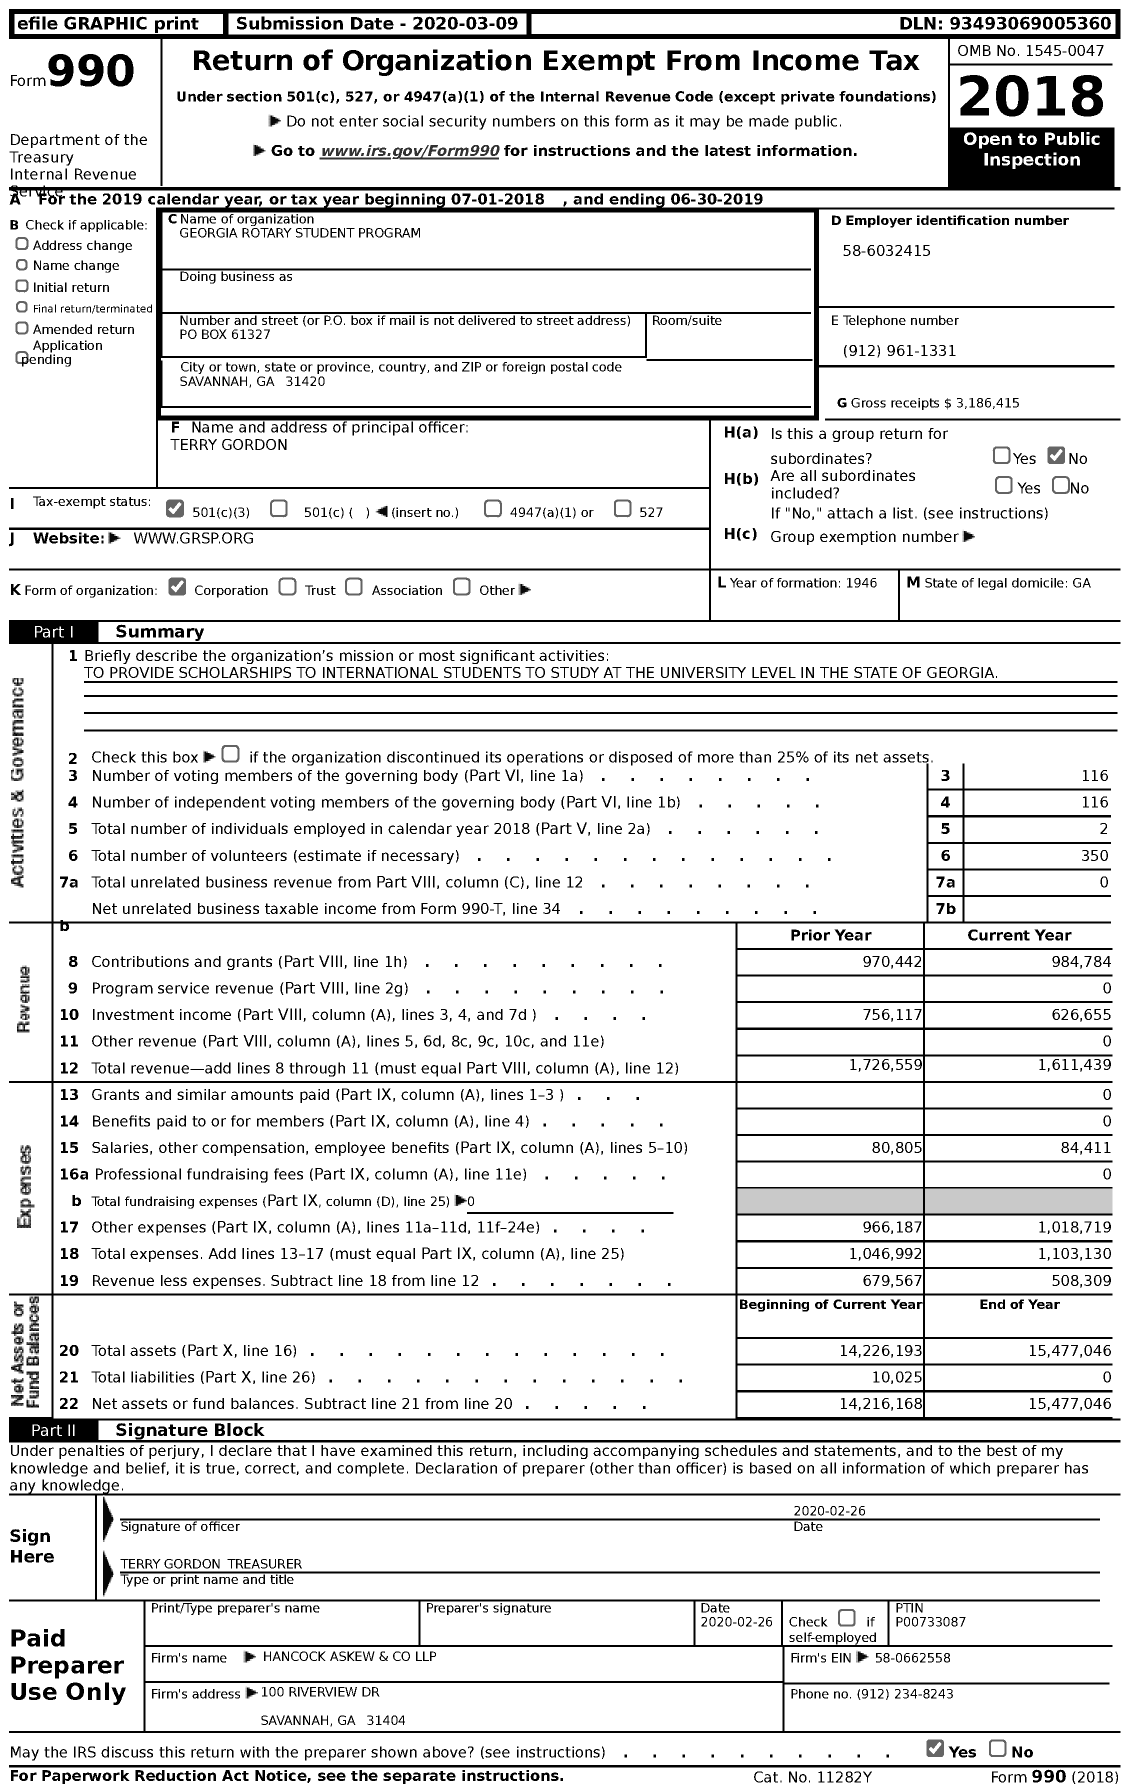 Image of first page of 2018 Form 990 for Georgia Rotary Student Program